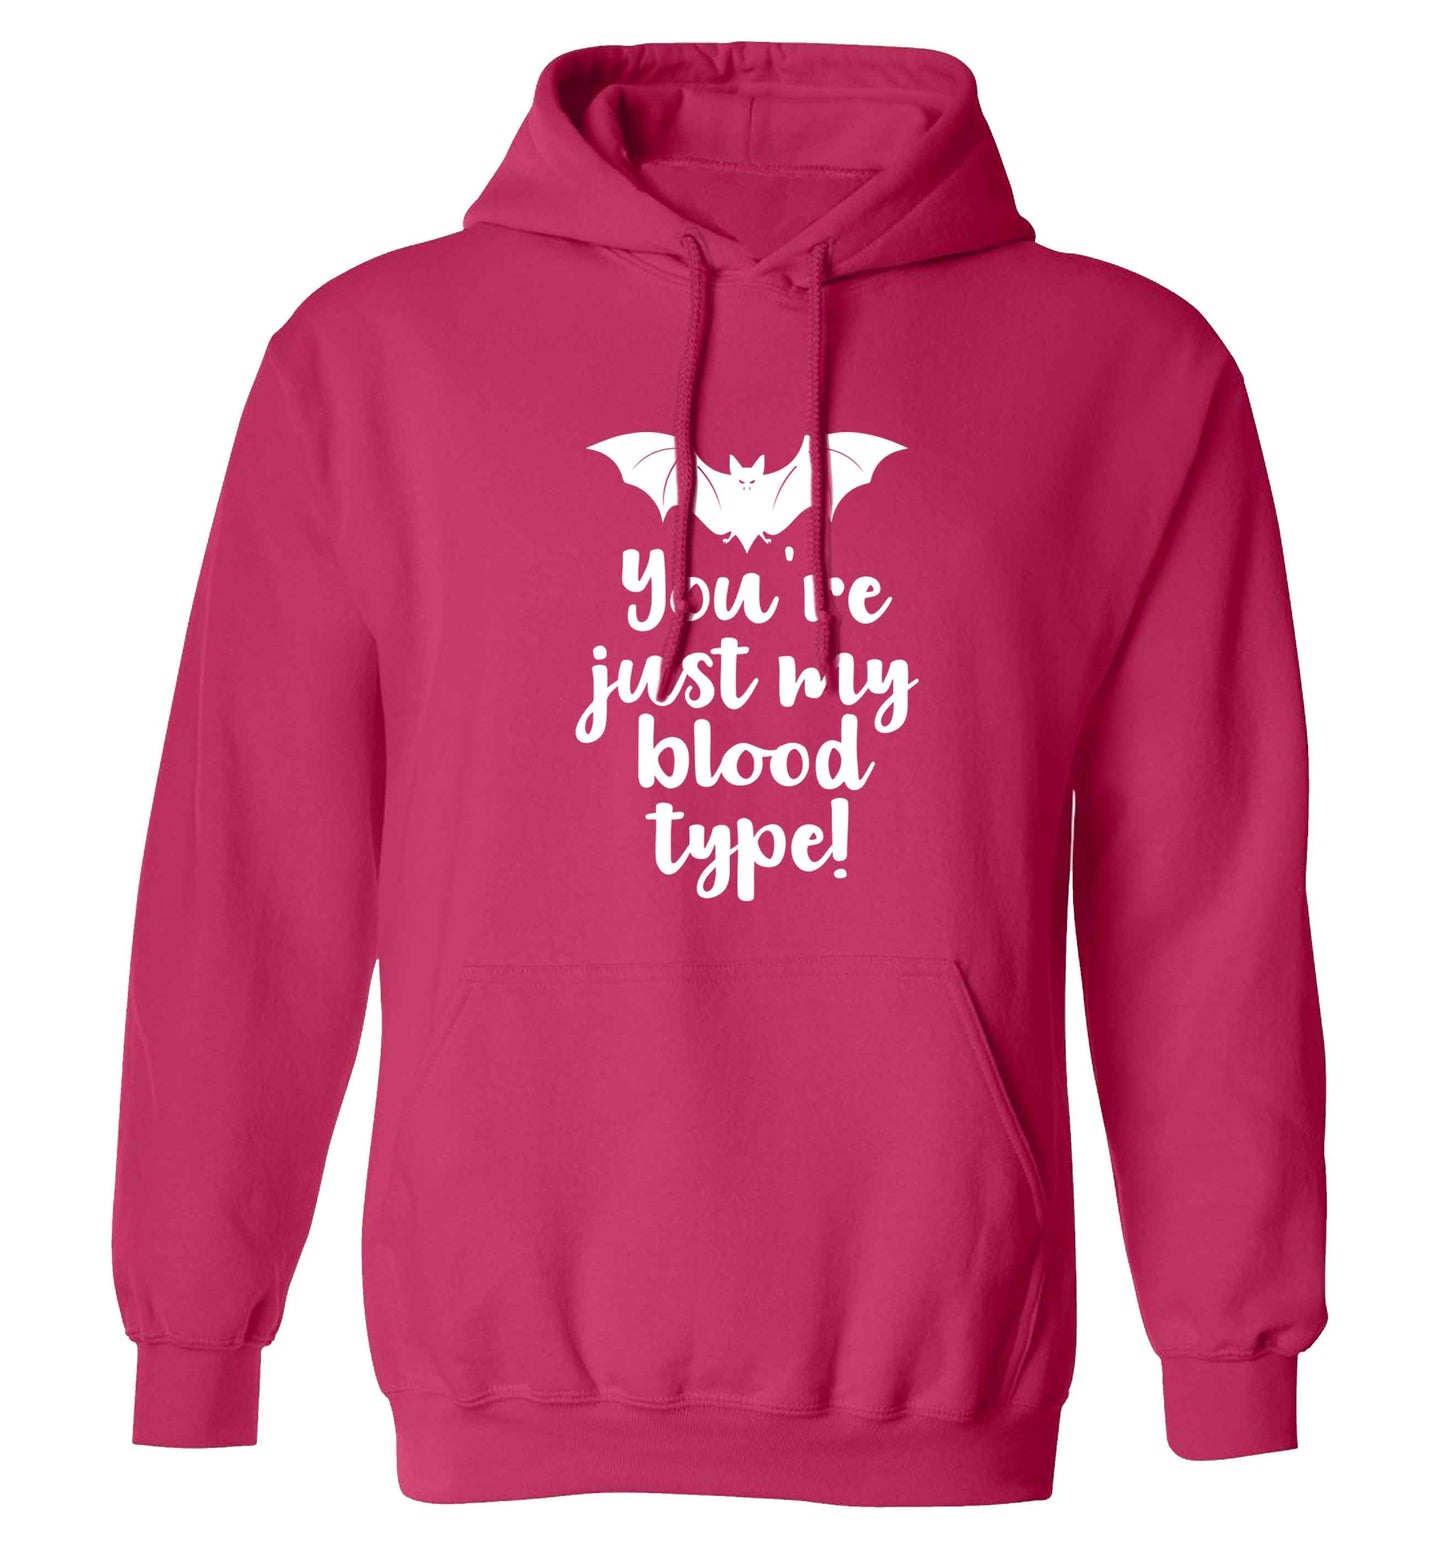 You're just my blood type adults unisex pink hoodie 2XL